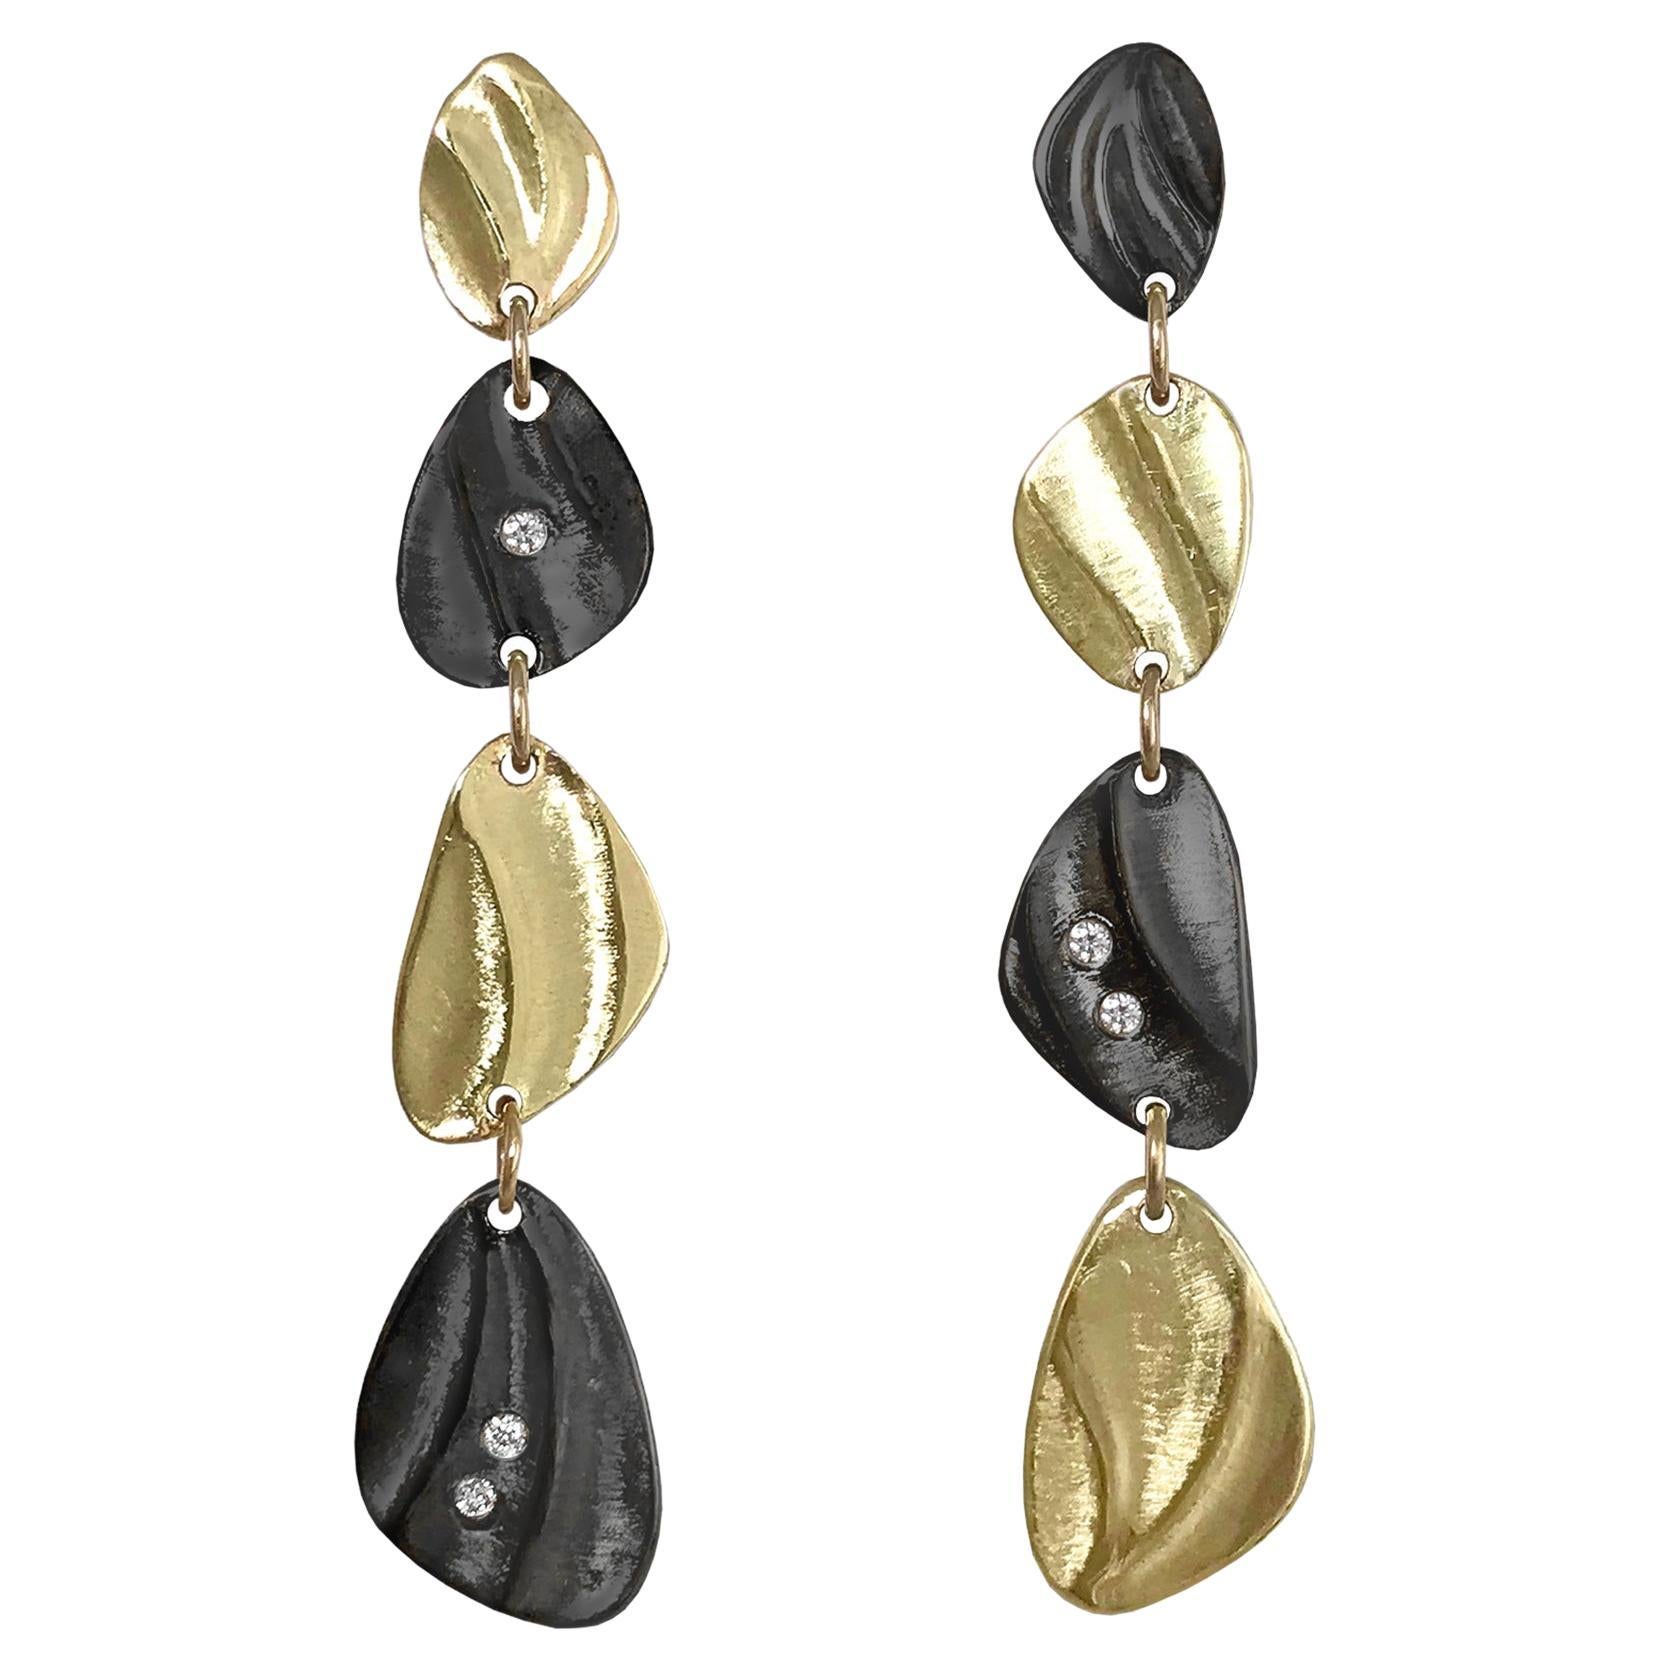 14 Karat Gold and Silver Pebble Dangle Earrings with Diamonds from K.Mita For Sale